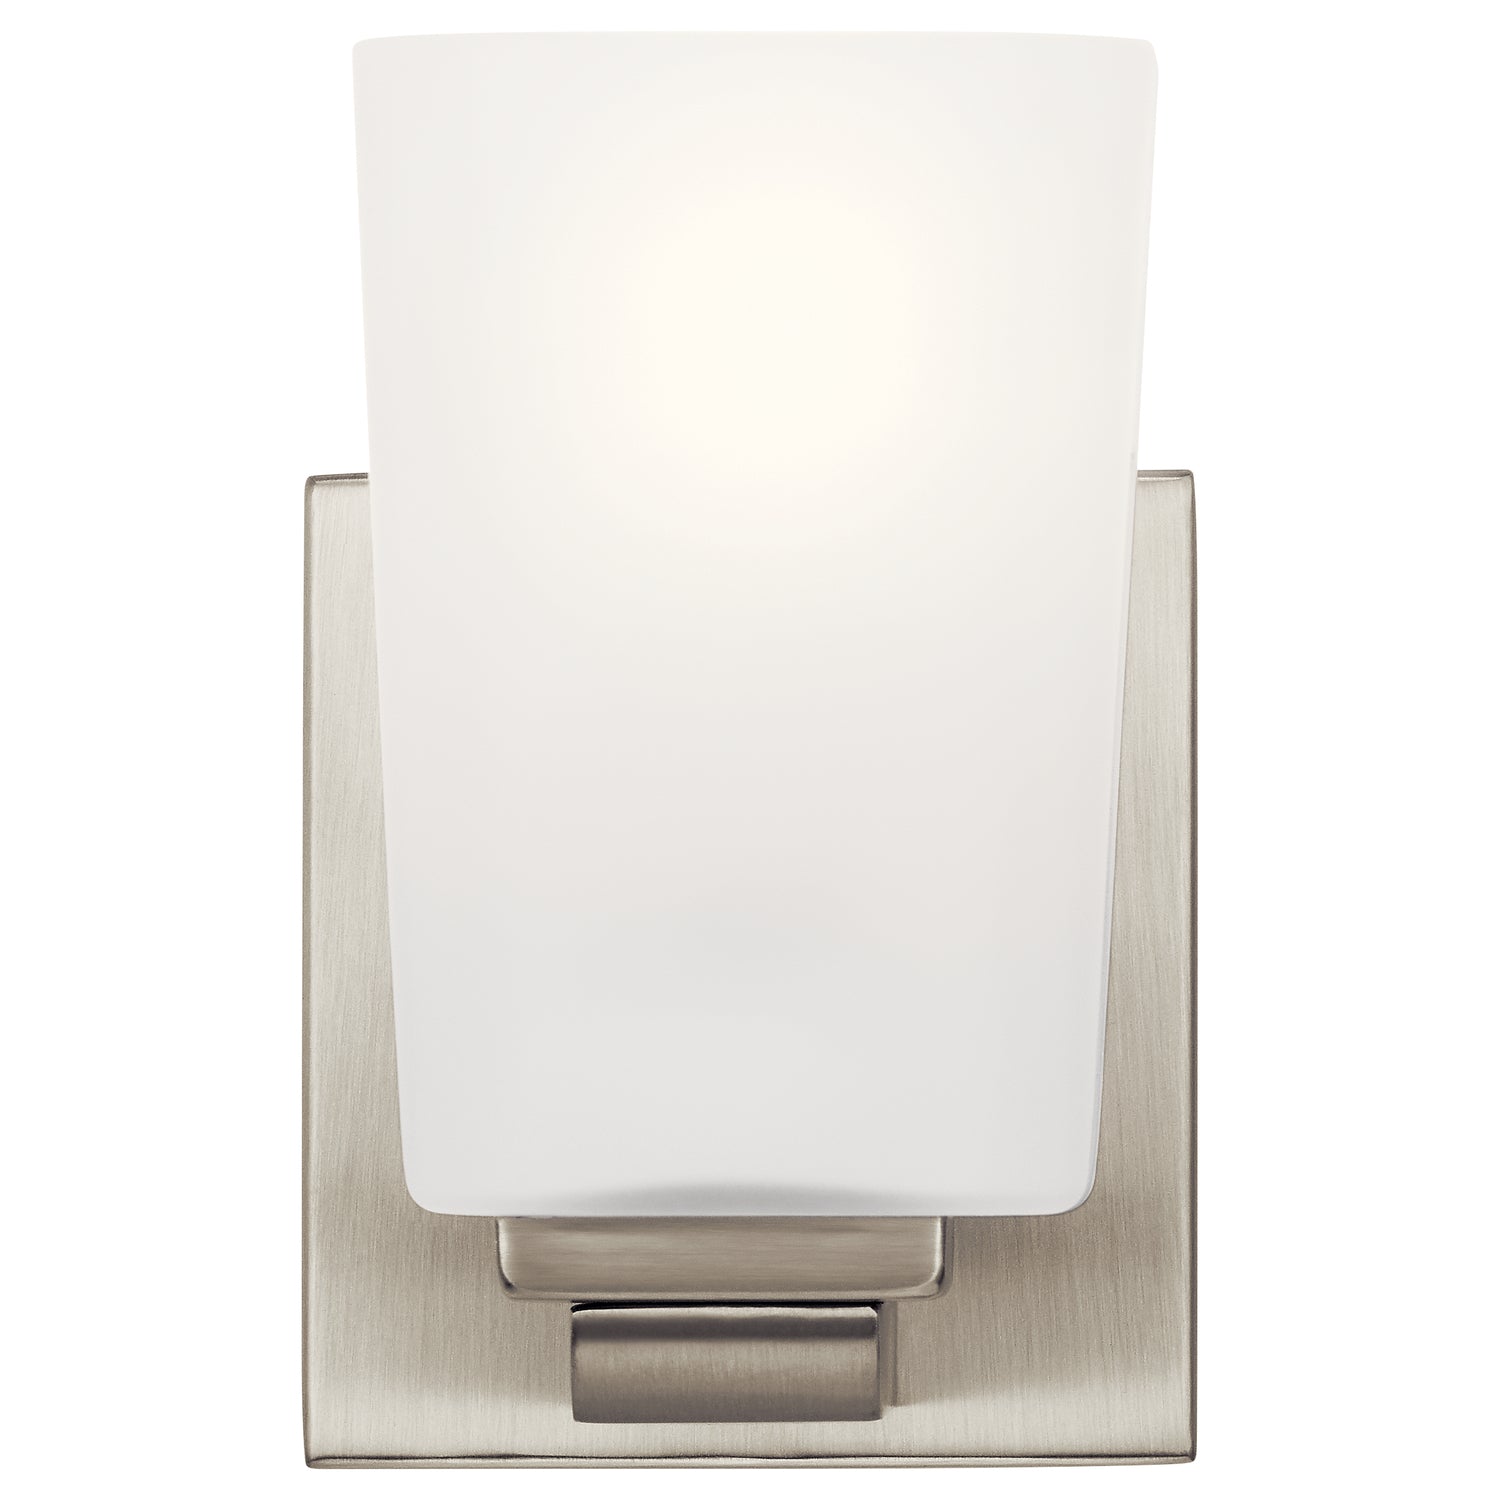 Roehm Sconce Brushed Nickel